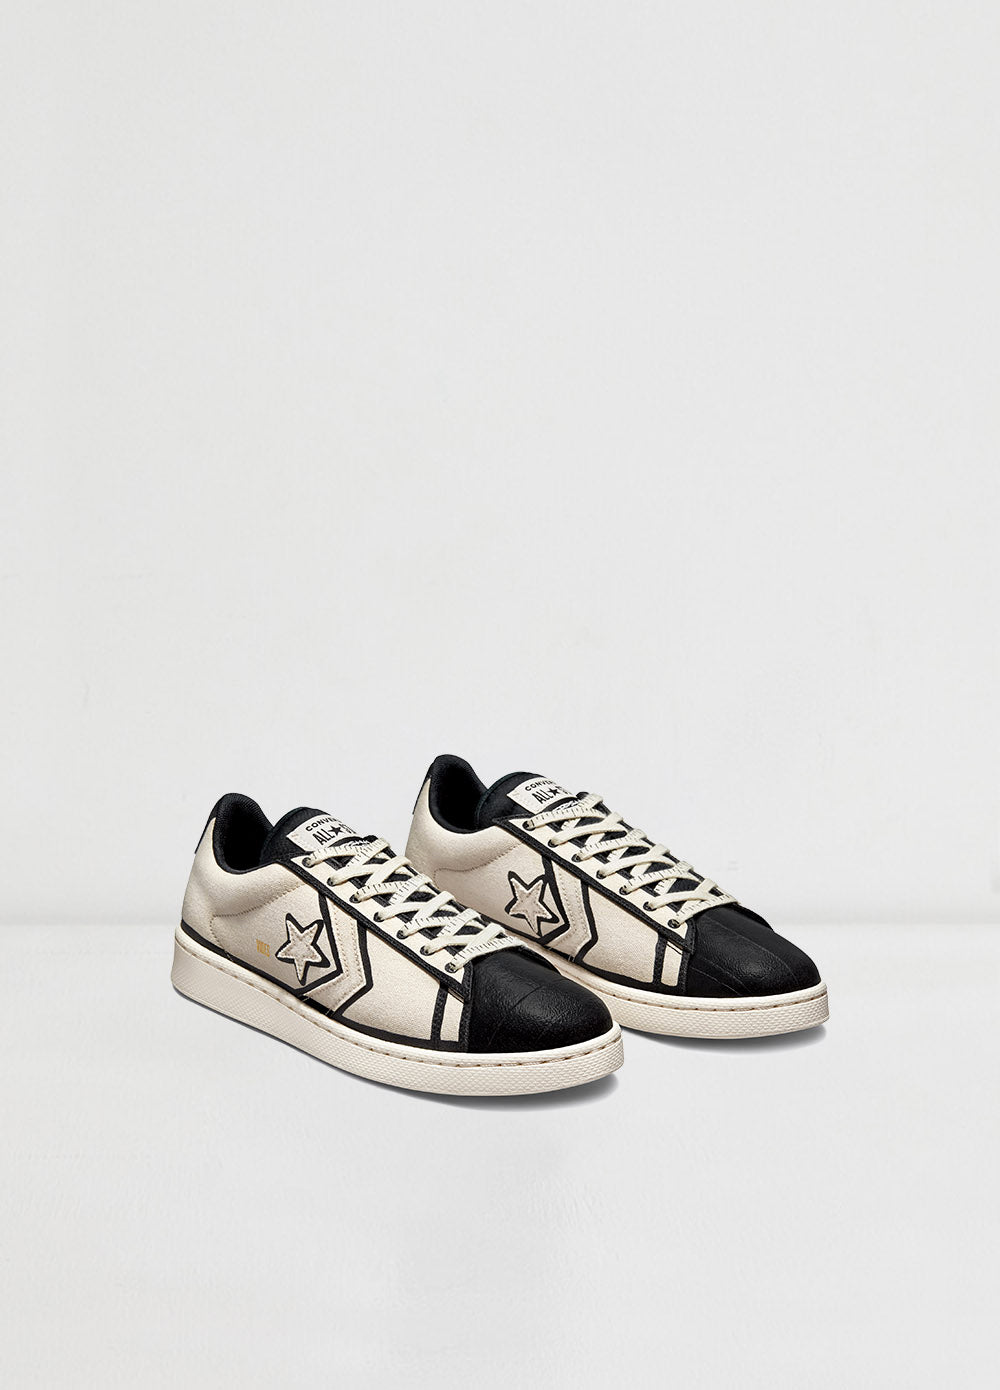 x Joshua Vides Pro Leather Sneakers